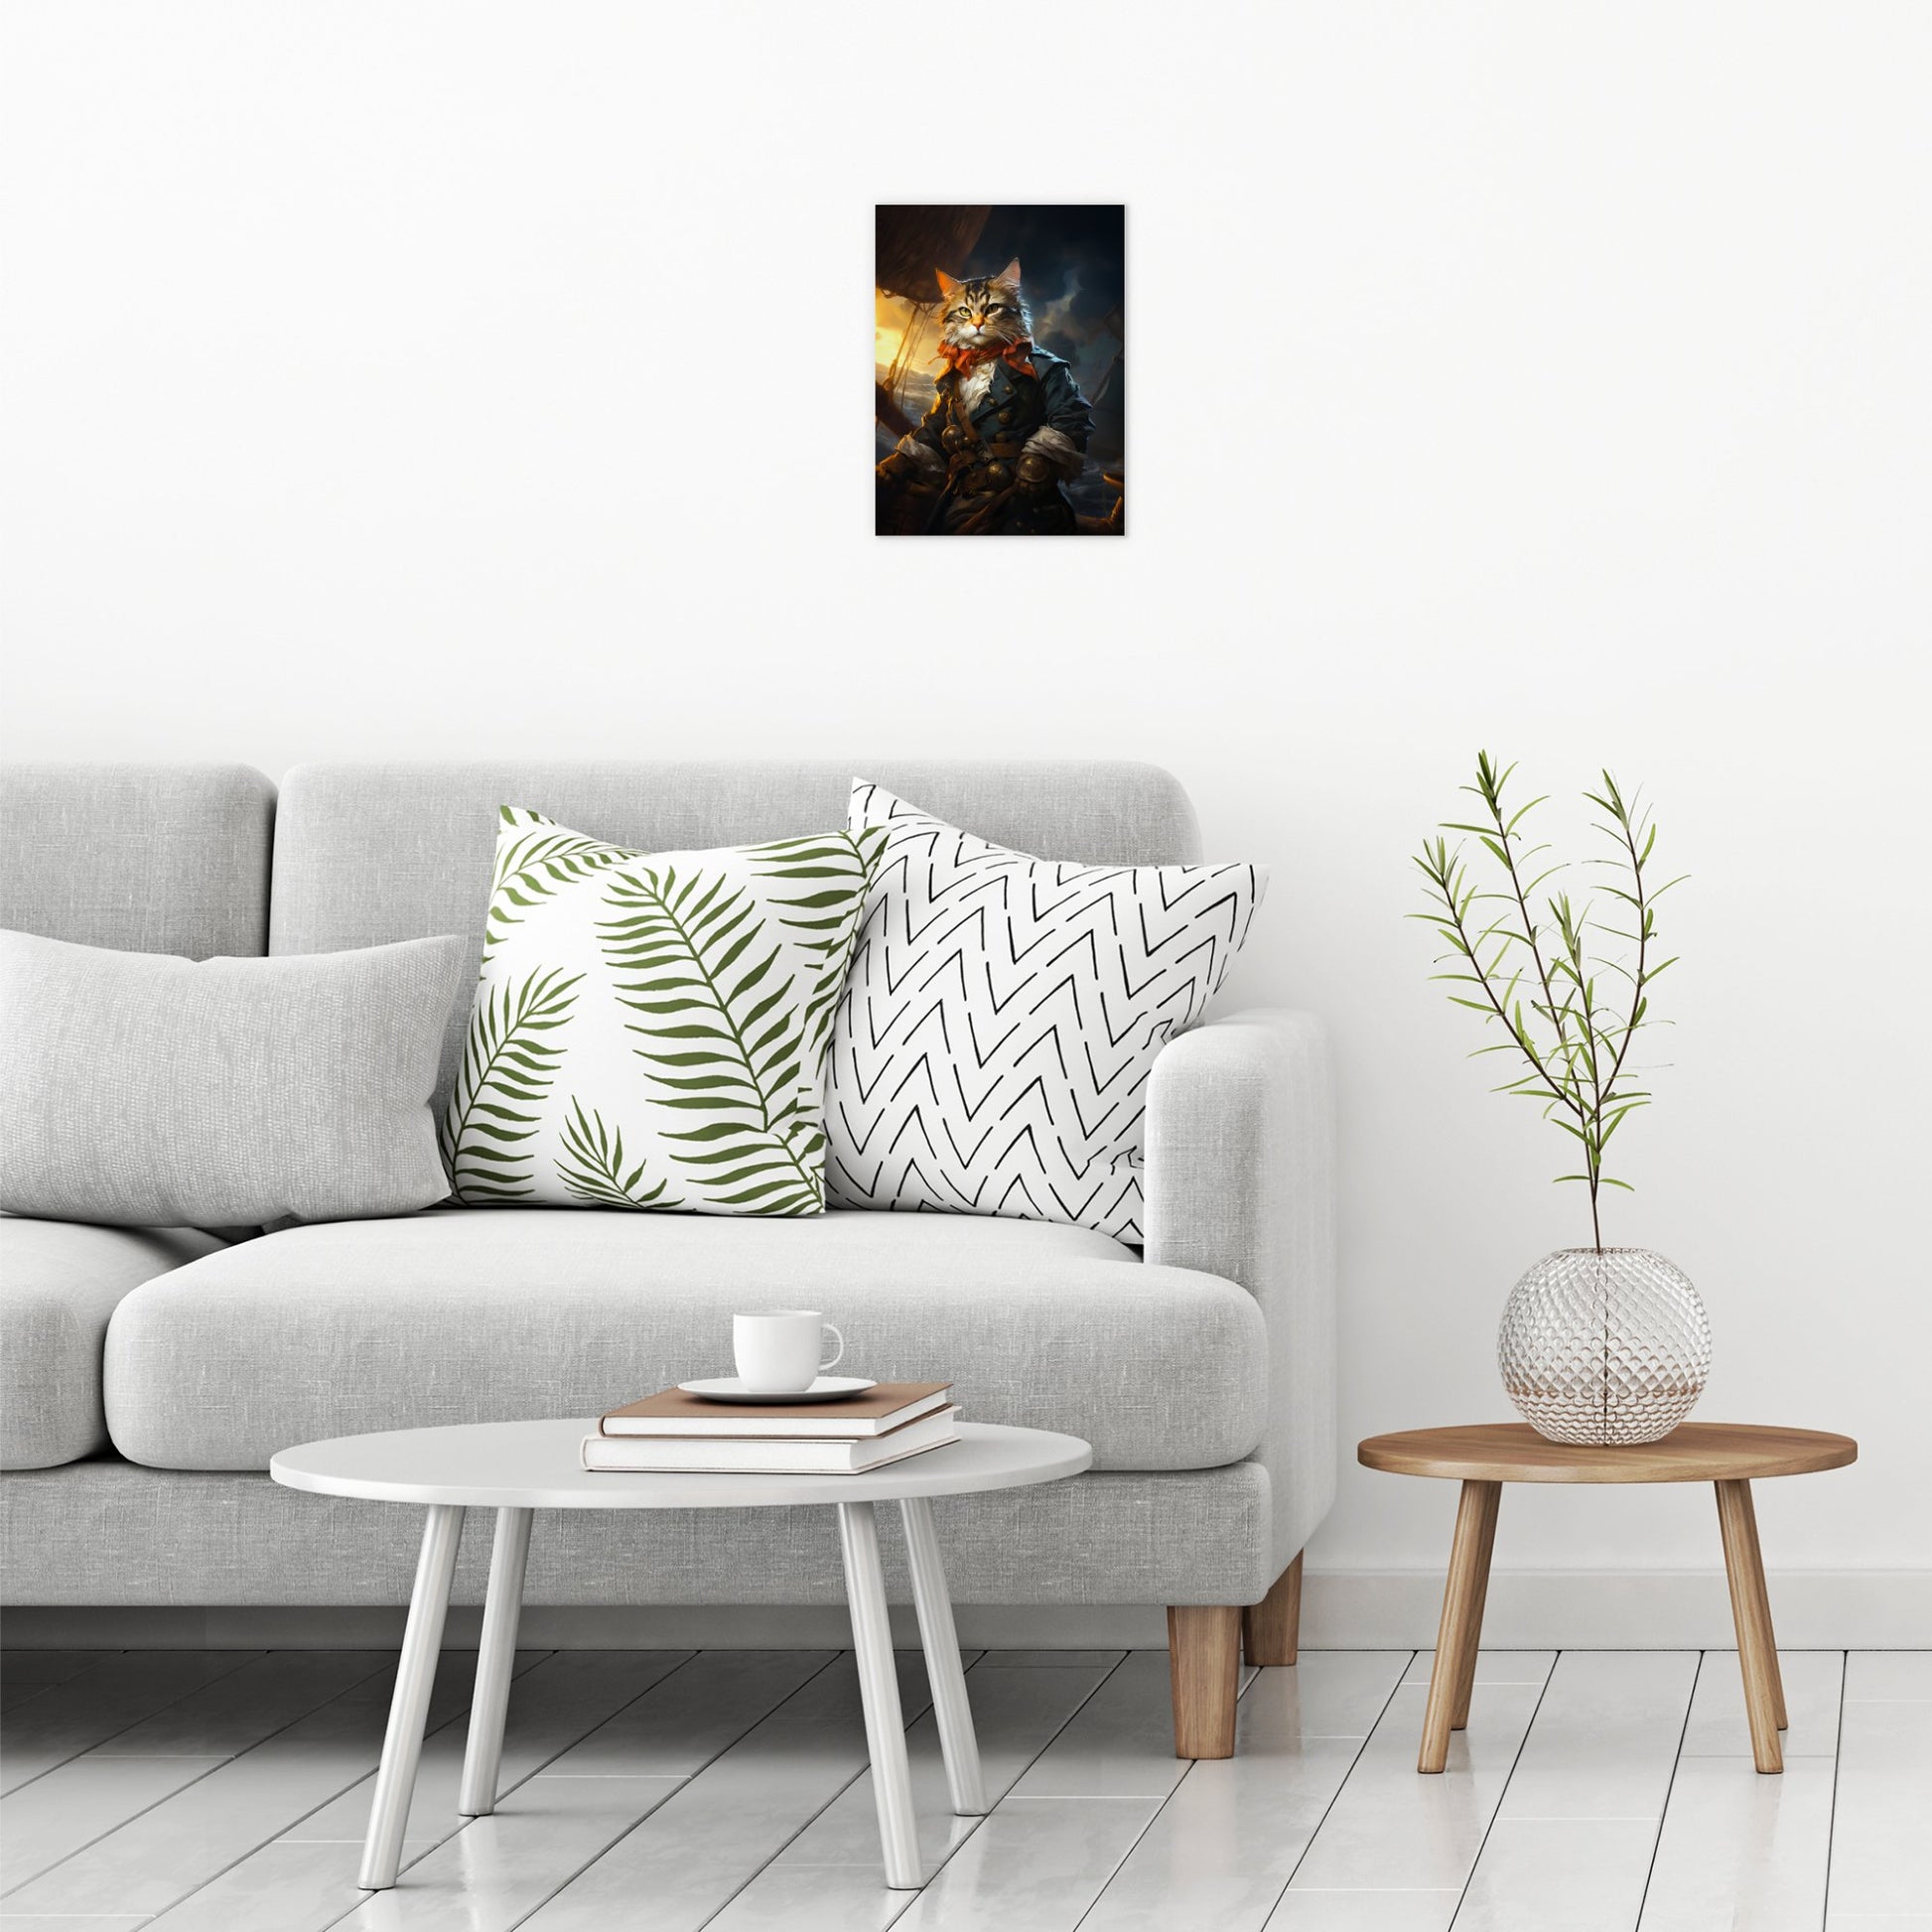 A contemporary modern room view showing a small size metal art poster display plate with printed design of a Pet Portraits - Pirate Cat Painting